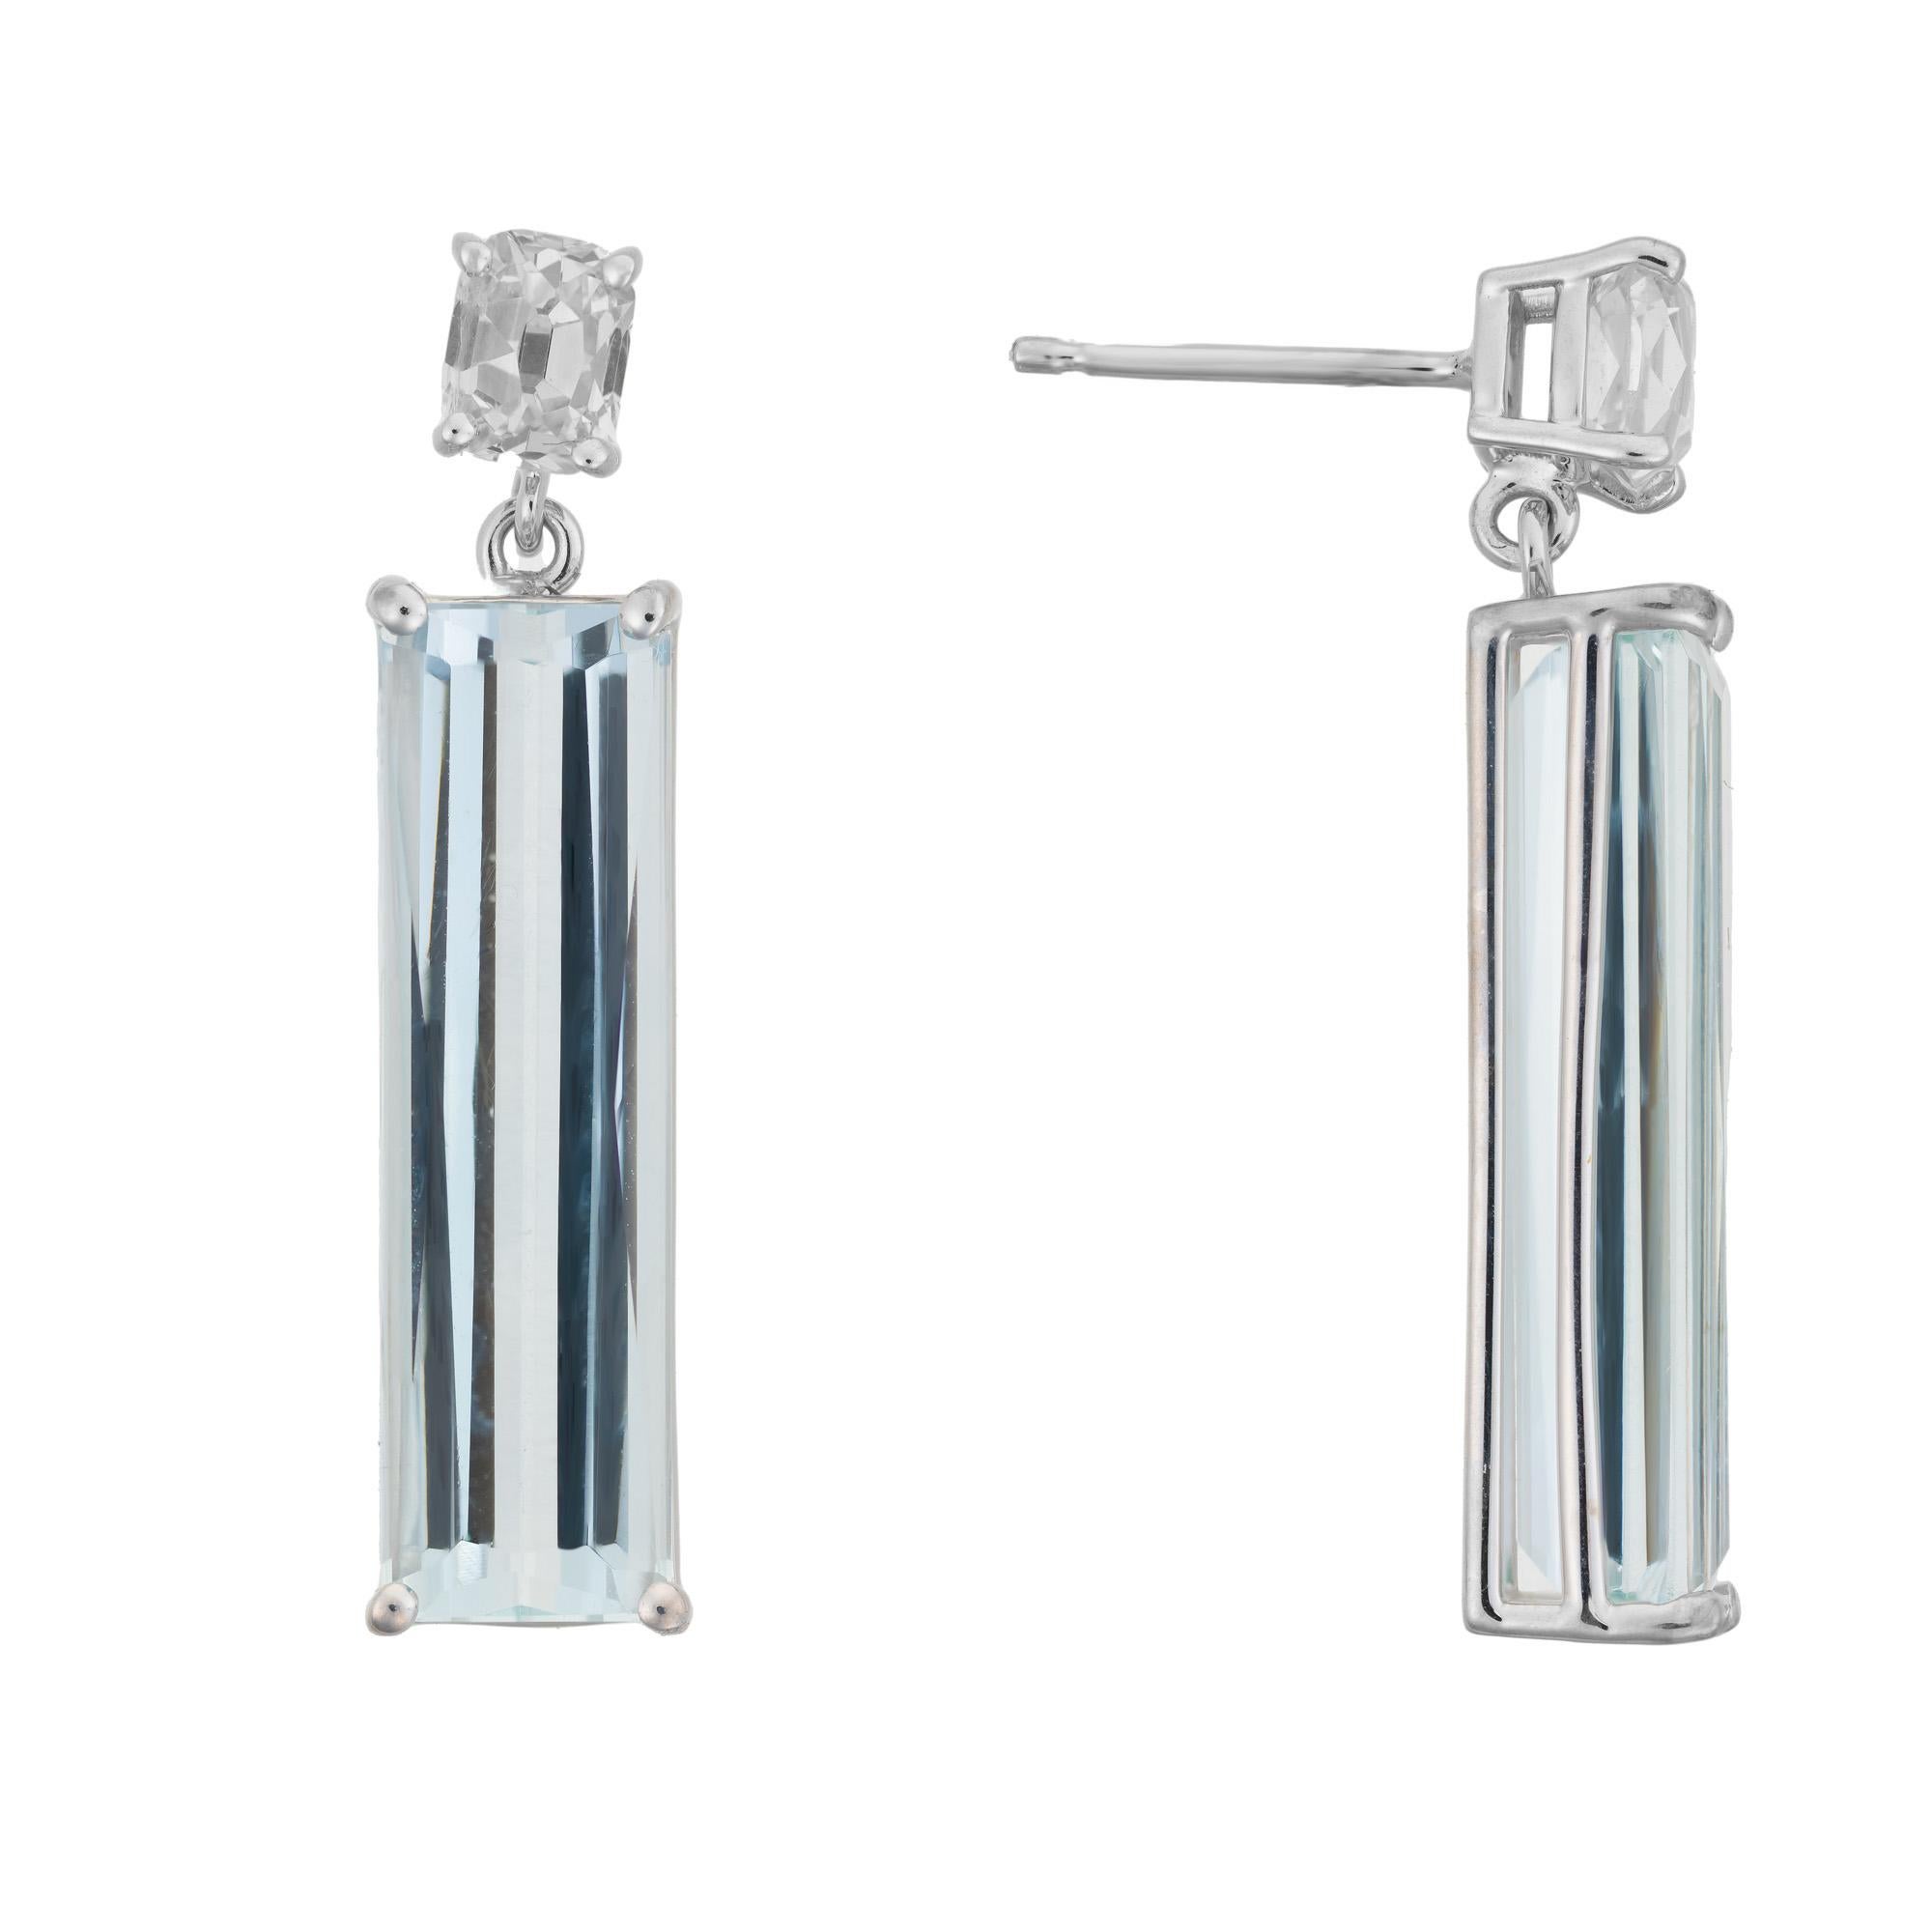 One of a kind aquamarine and diamond dangle earrings. 2 elongated emerald cut aquamarines, mounted in 14k white gold handmade settings accented with 2 custom shaped old mine cut diamonds. These aquas are a natural beautiful blue and slightly